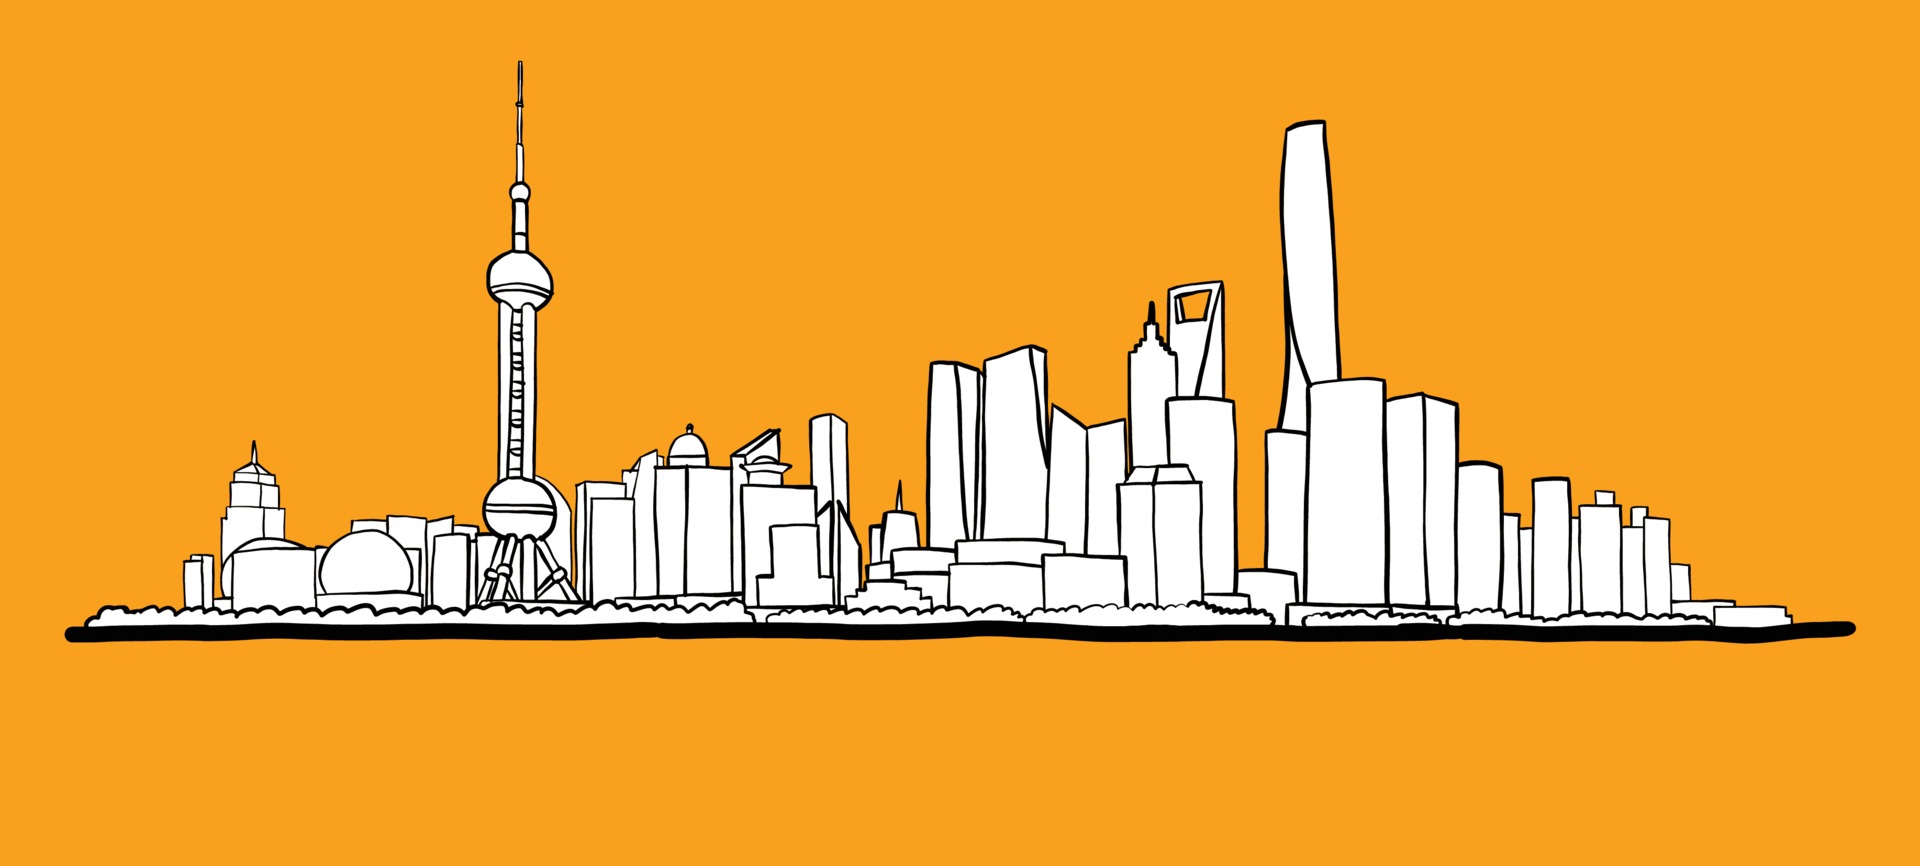 Shanghai skyline freehand drawing sketch on white background. 3224928